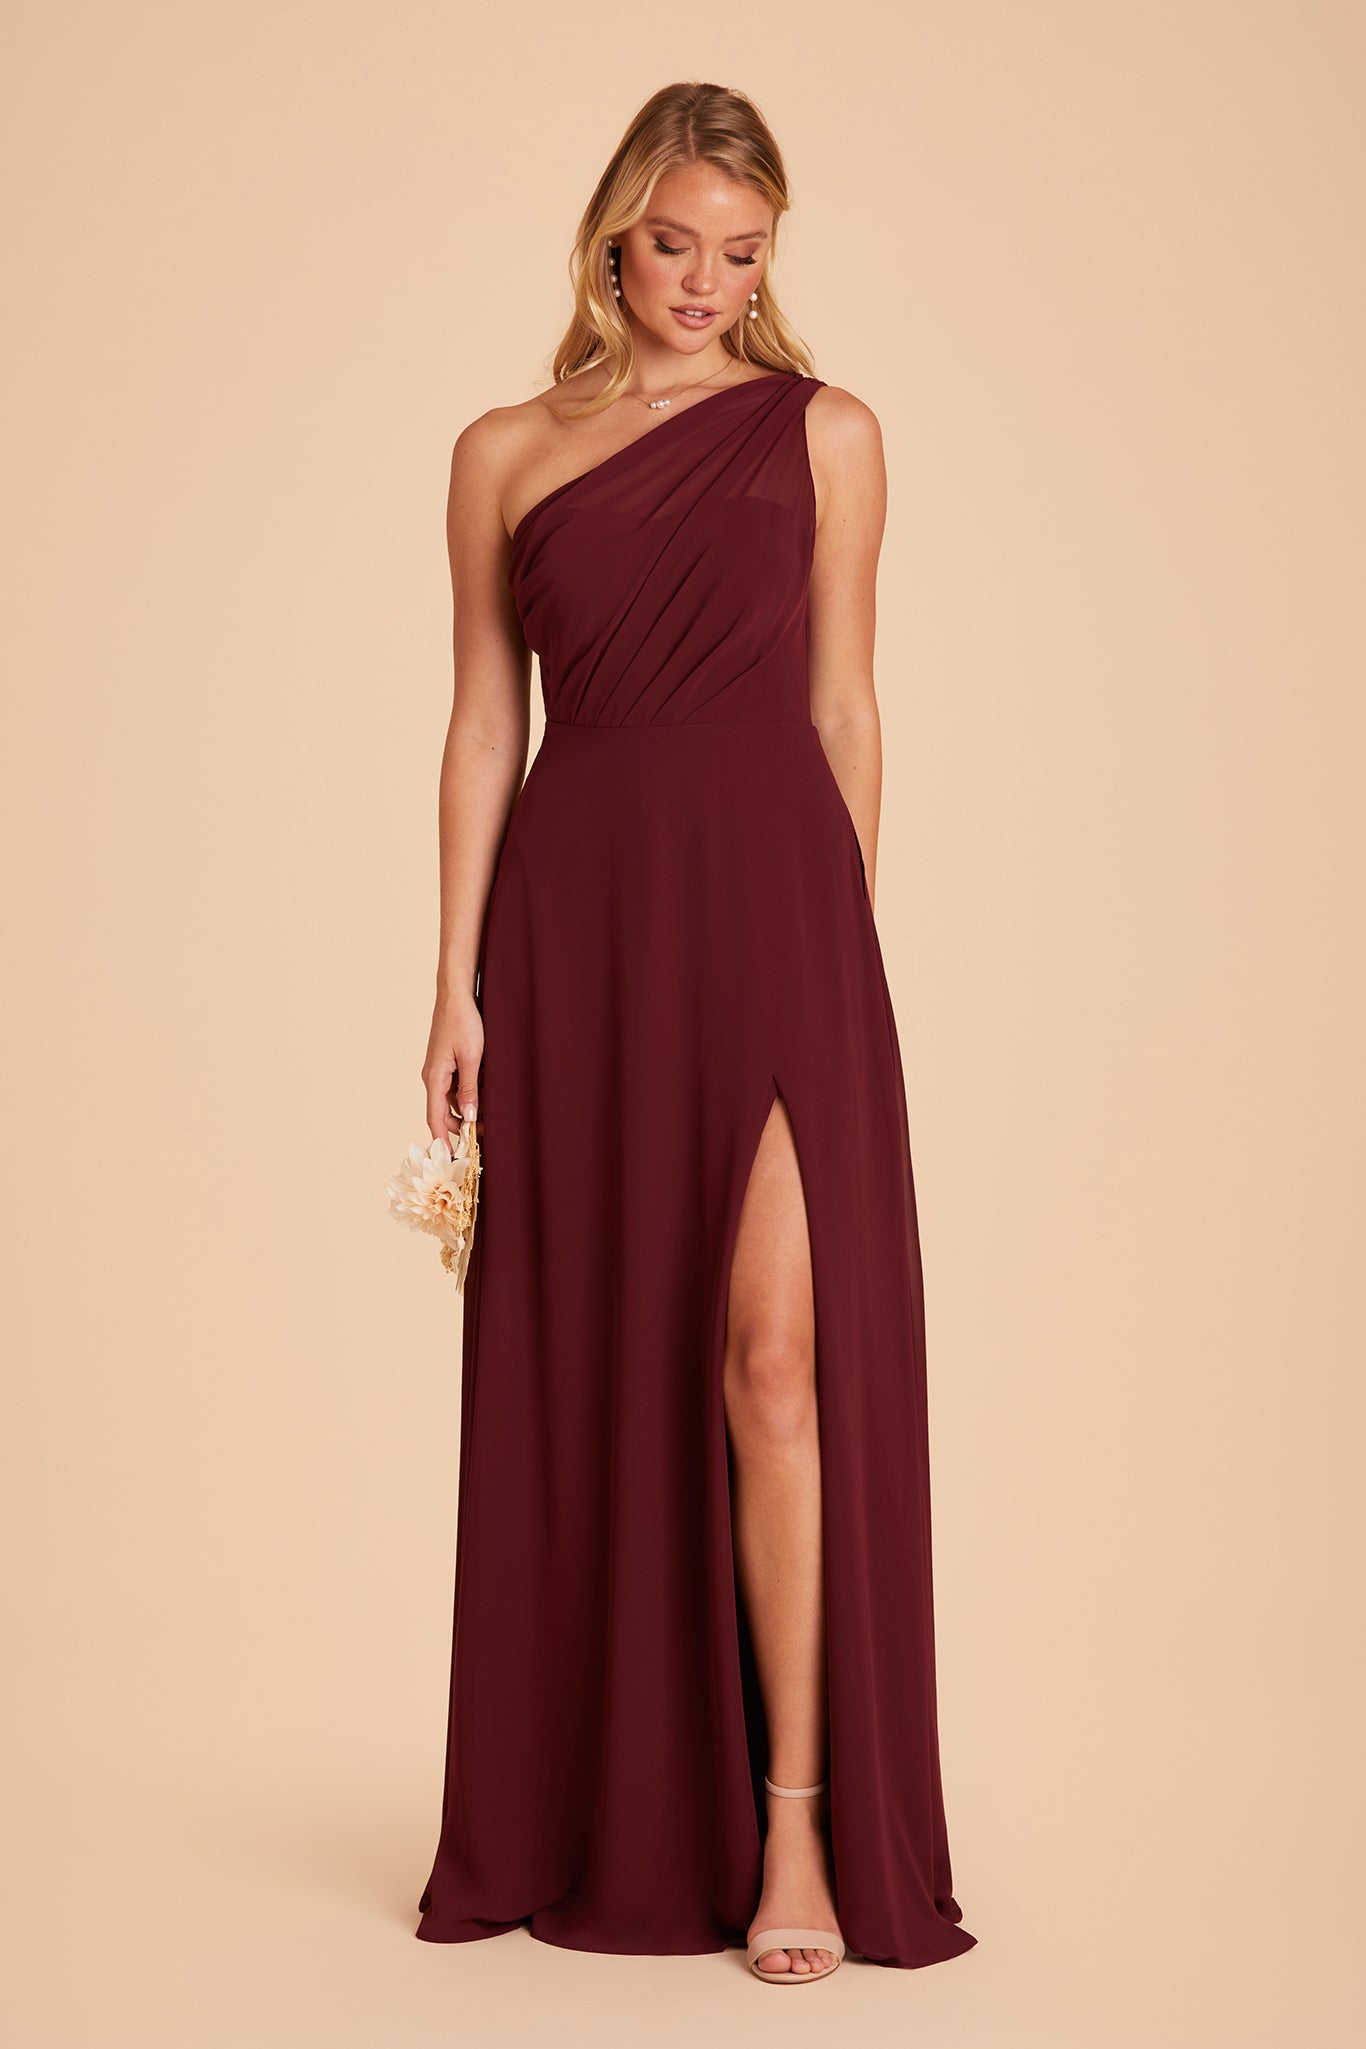 Front view of the Kira Dress in cabernet chiffon shows a slender model with a light skin tone wearing an asymmetrical one-shoulder, full-length dress with a mid-thigh slit on the left side. Chiffon gathers into soft pleating at the shoulder of the bodice with a smooth fit at the waist as the dress skirt with a slight A-line silhouette flows to the floor.    